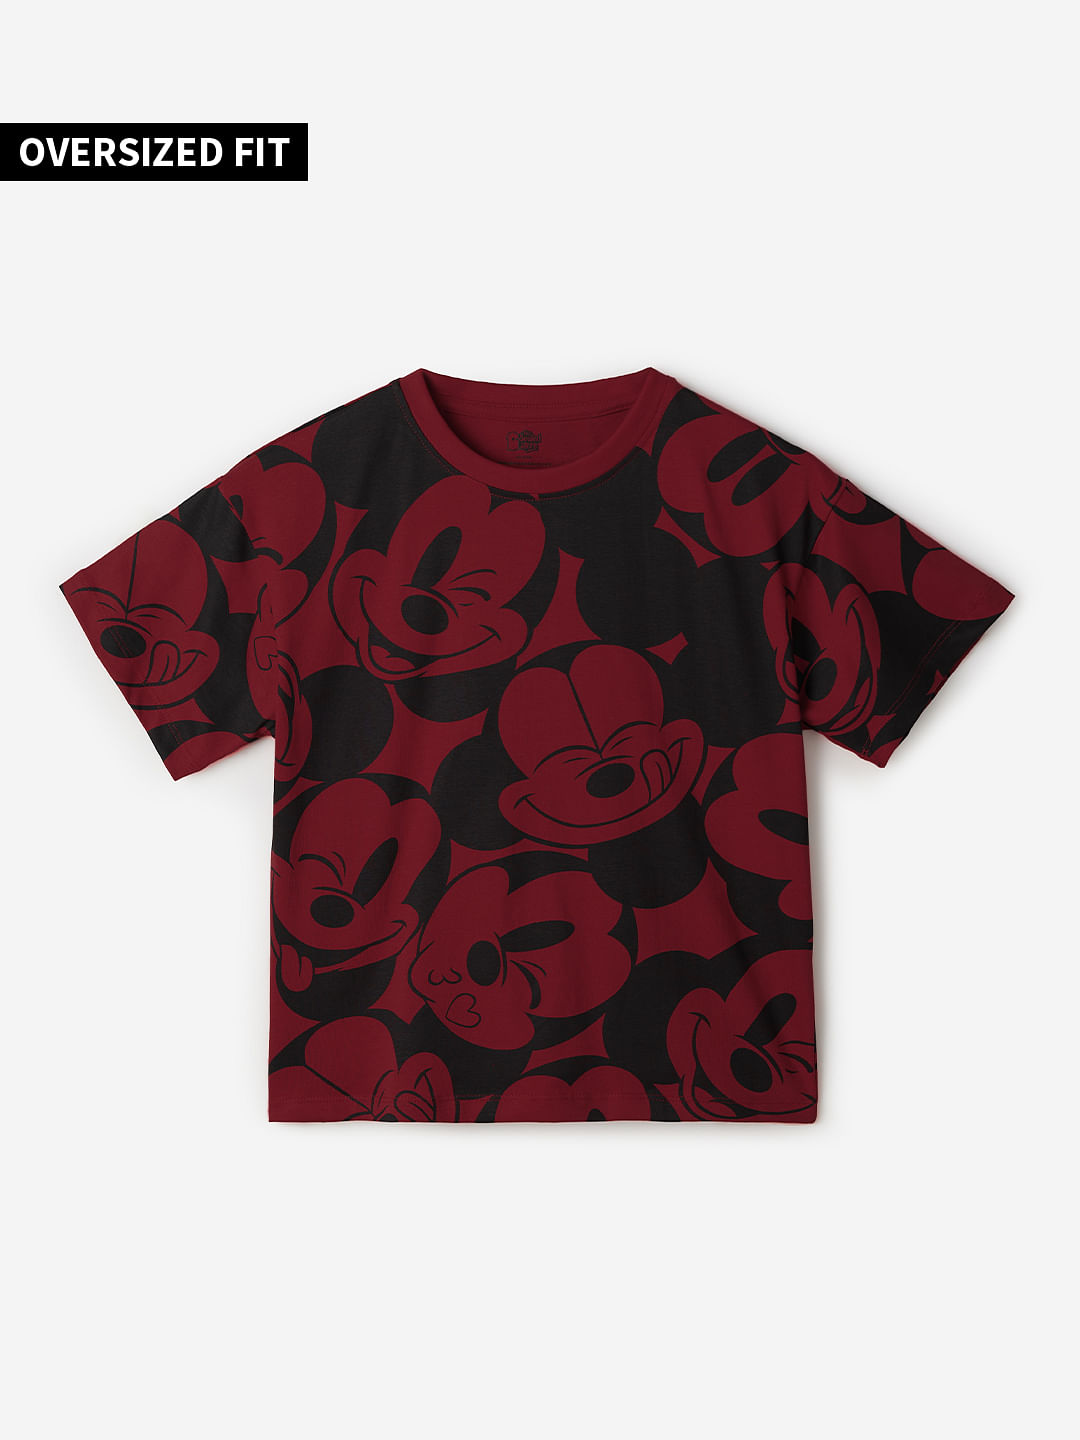 Buy Mickey Mouse: Emojis Girls Oversized T-shirts Online